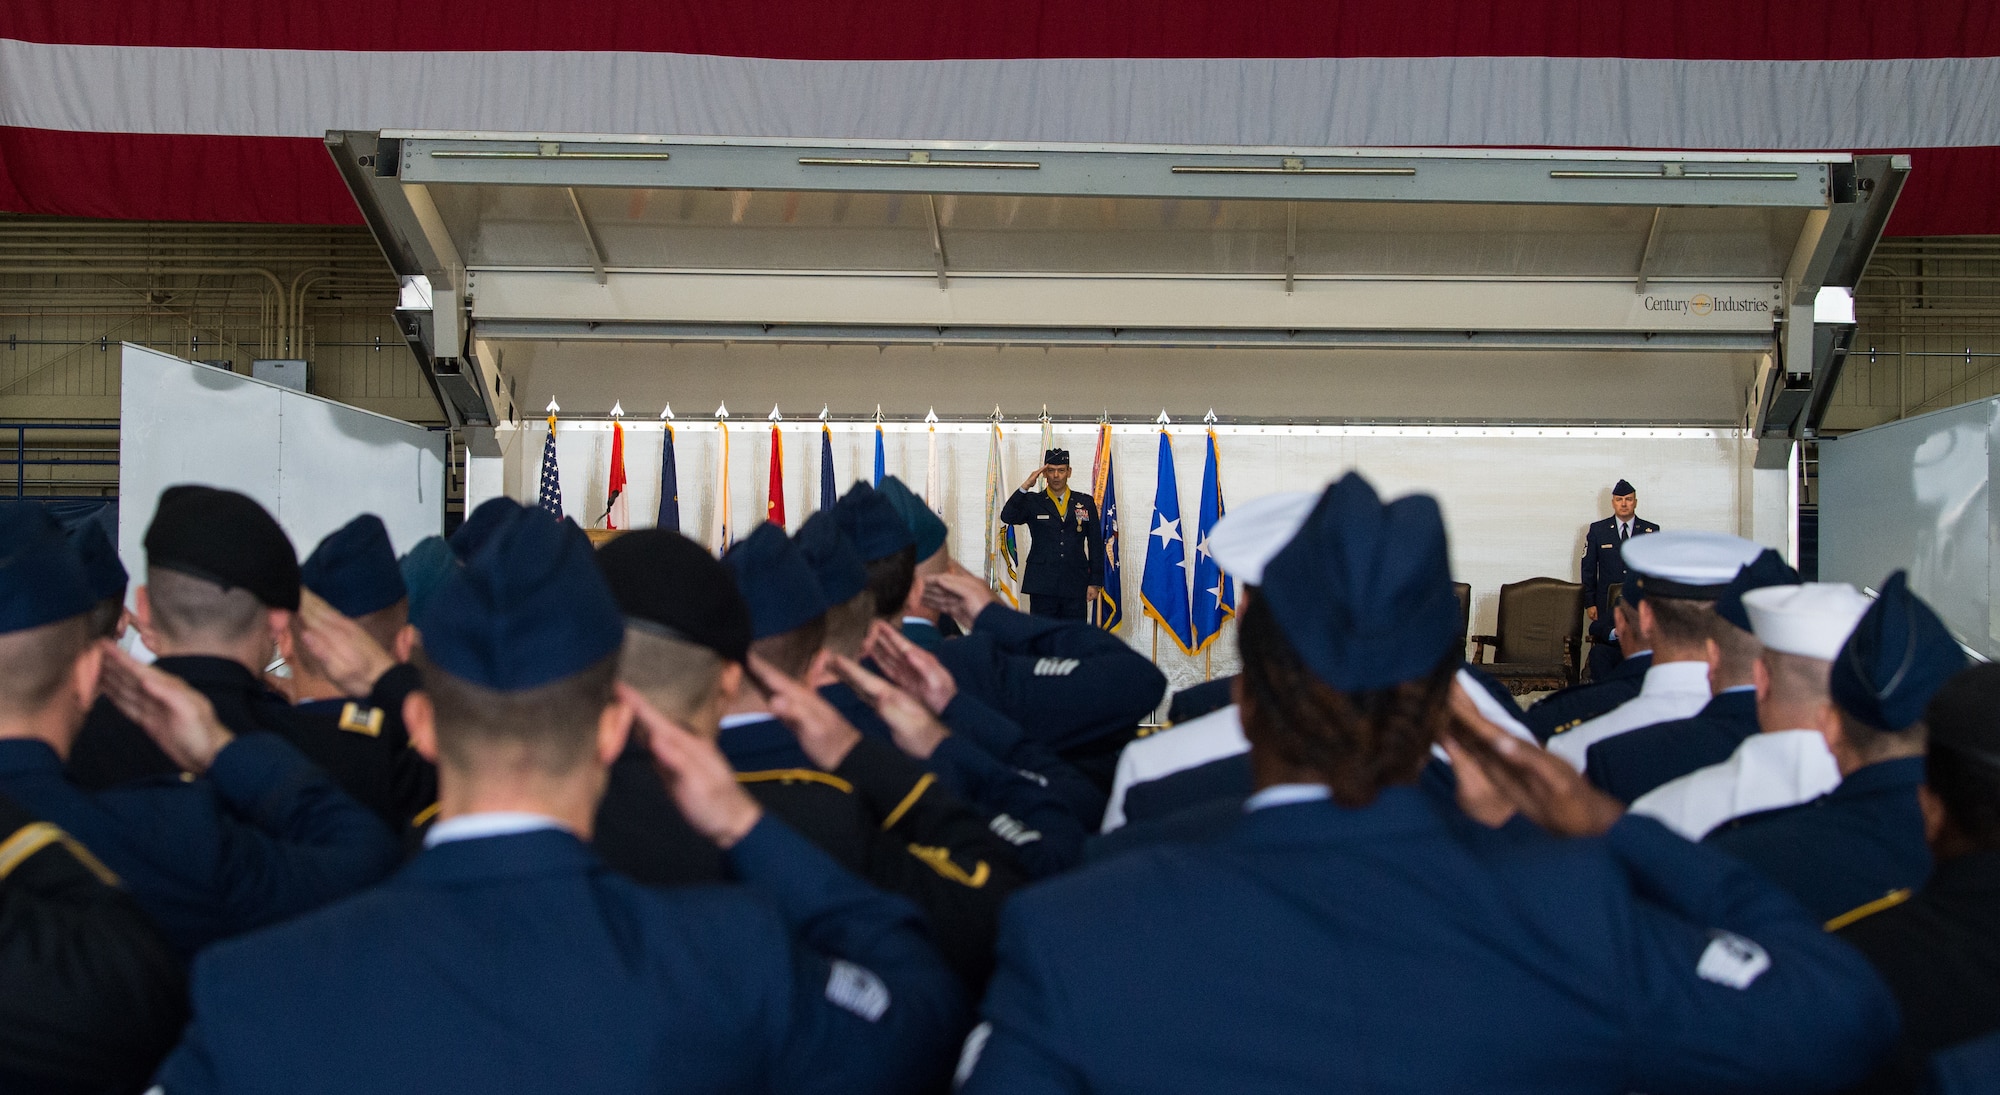 Joint service members render their final salutes to U.S. Air Force Lt. Gen. Ken Wilsbach during a change of command ceremony for Alaskan North American Aerospace Defense Command, Alaskan Command, and the Eleventh Air Force at Joint Base Elmendorf-Richardson, Alaska, Aug. 24, 2018. U.S. Air Force Lt. Gen. Tom Bussiere replaced Wilsbach as commander. Family, friends, Arctic warriors and civic leaders from the surrounding communities attended the ceremony that was jointly-officiated by U.S. Air Force Gen. Terrence J. O’Shaughnessy, commander of the United States Northern Command and North American Aerospace Defense Command, and U.S. Air Force Gen. Charles Q. Brown, the commander of Pacific Air Forces.